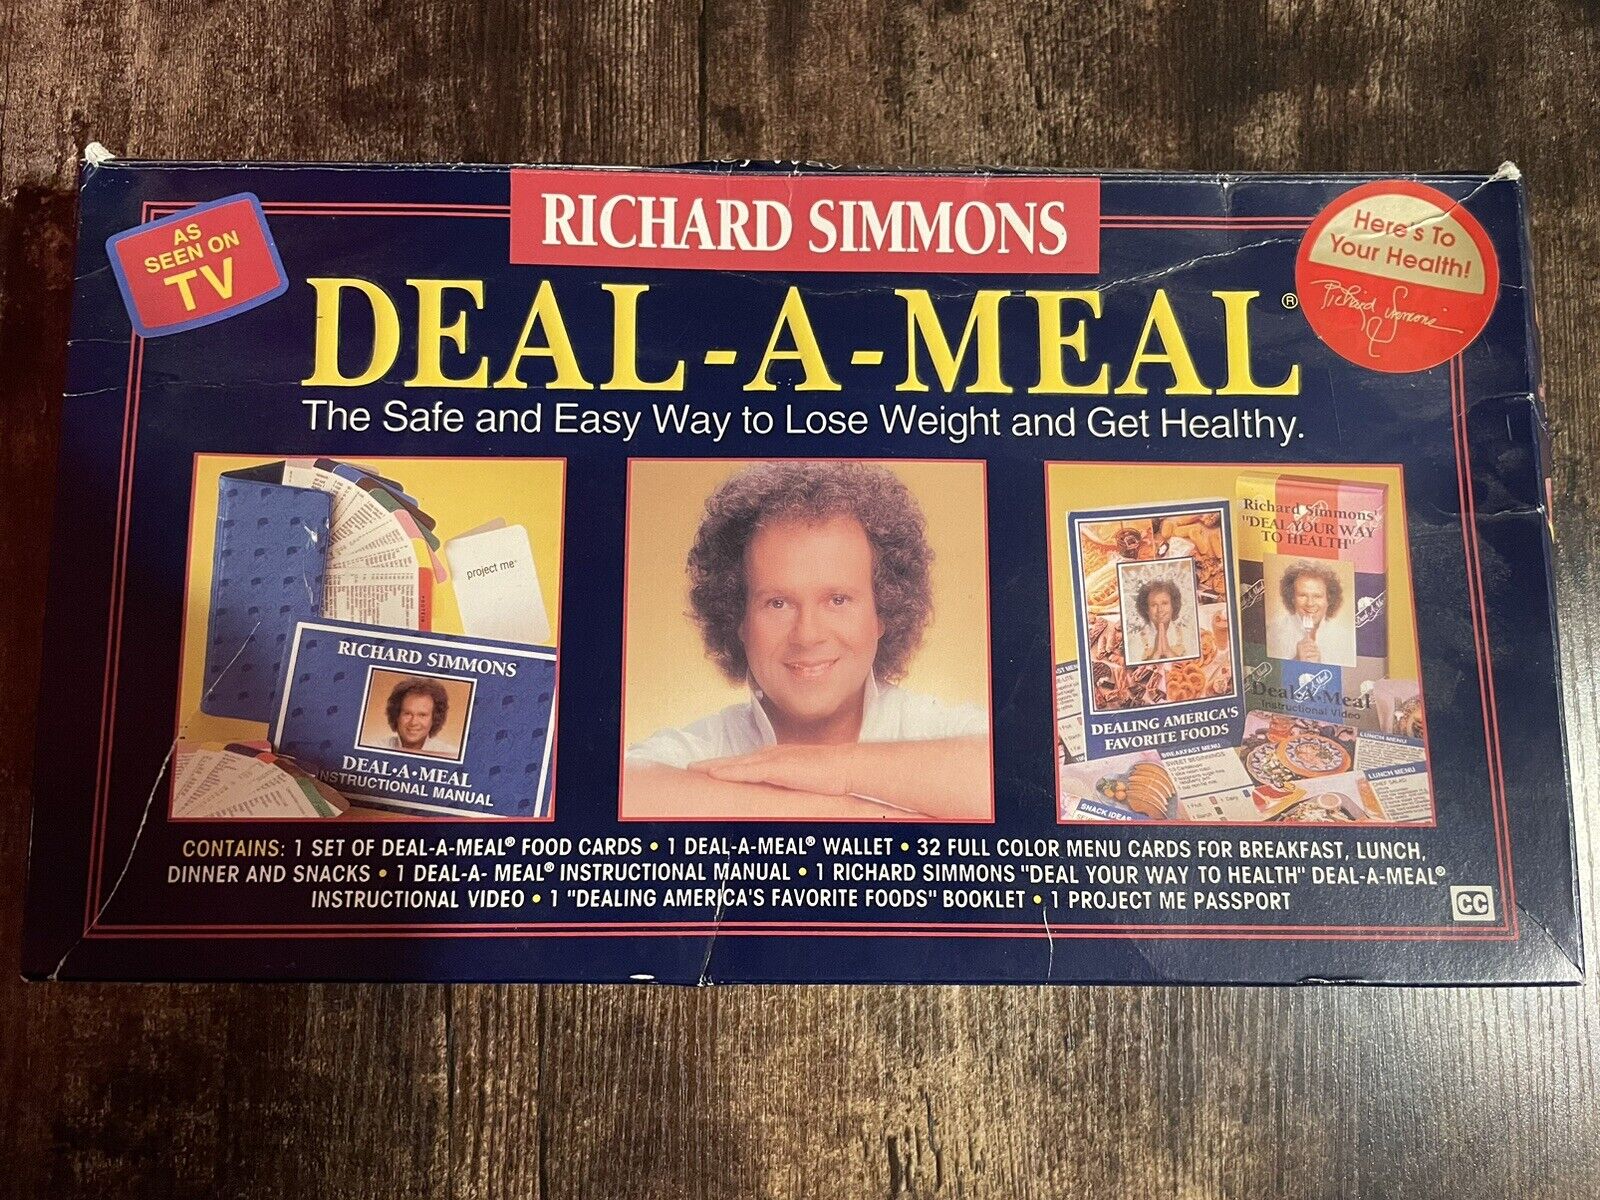 Vintage 1991-1993 RICHARD SIMMONS Deal-A-Meal Weight Loss Kit Opened Box